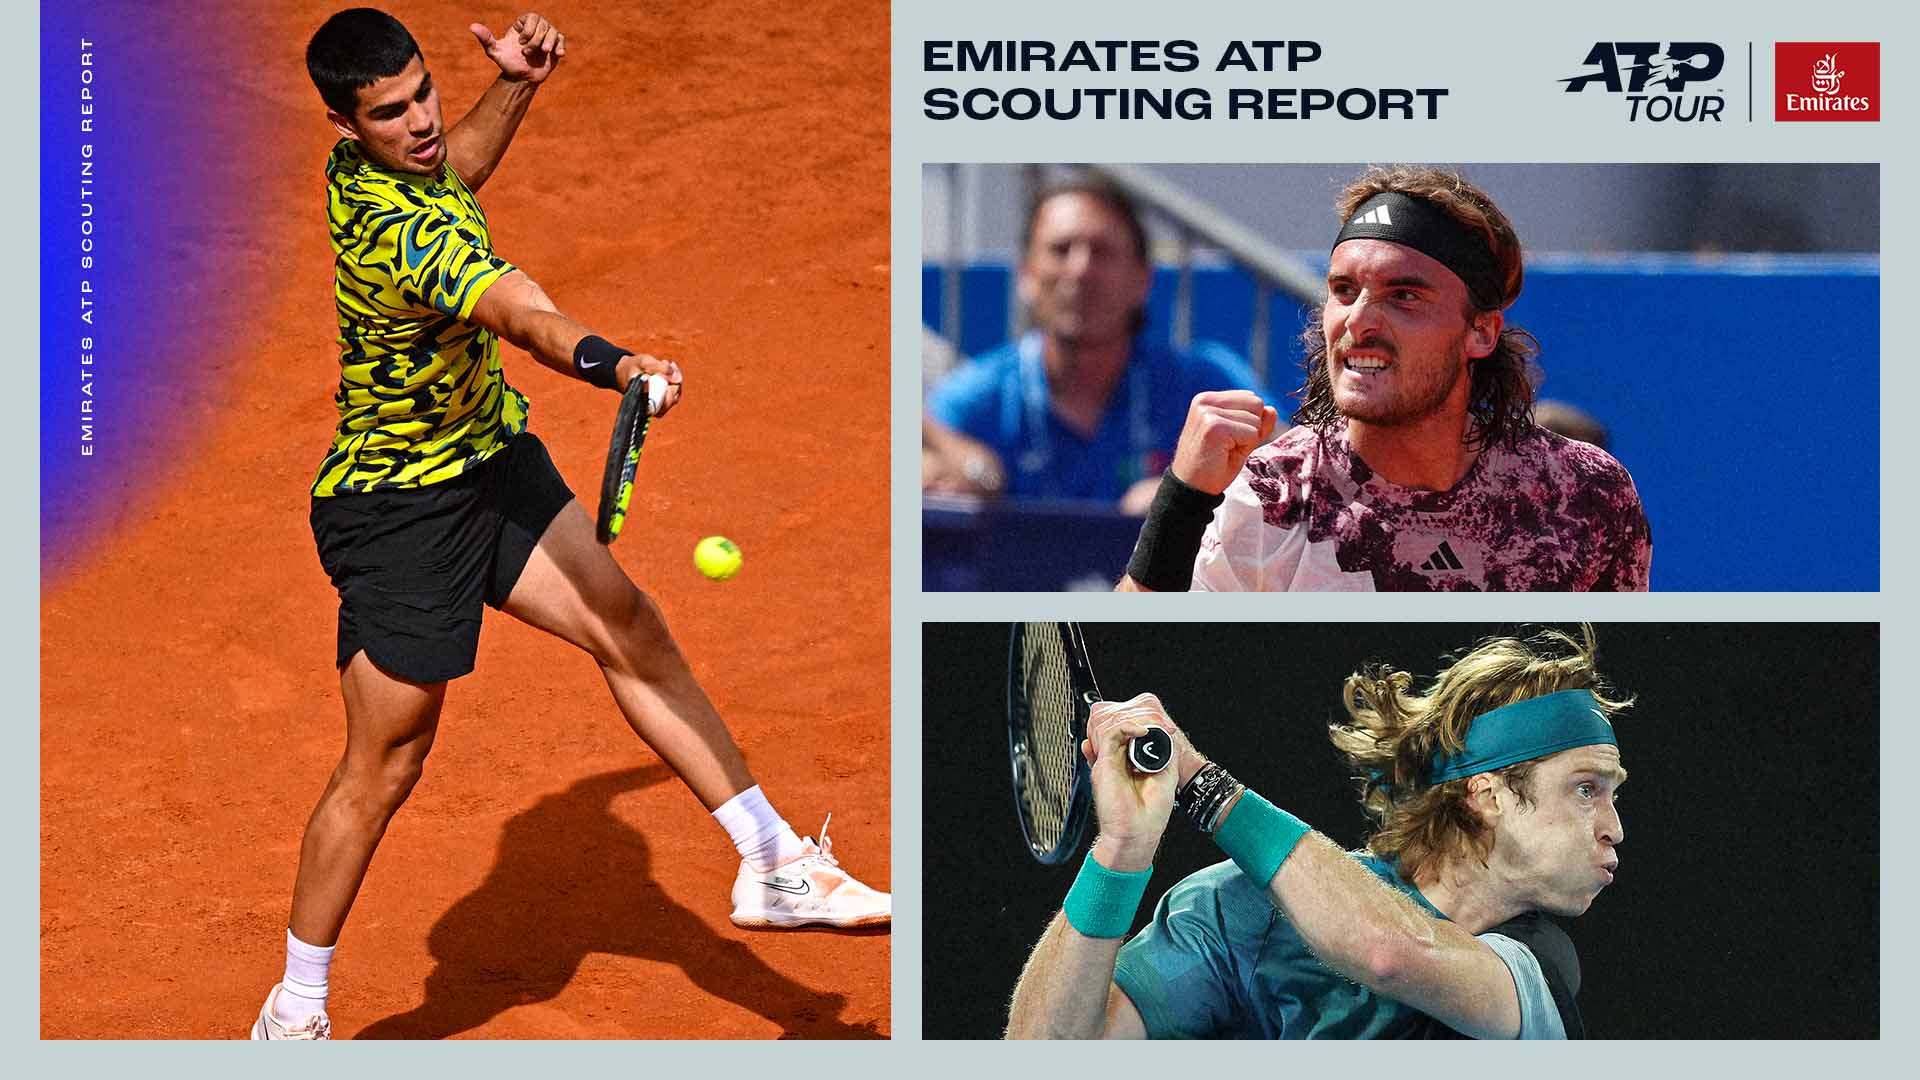 Carlos Alcaraz, Stefanos Tsitsipas and Andrey Rublev are in action this week.